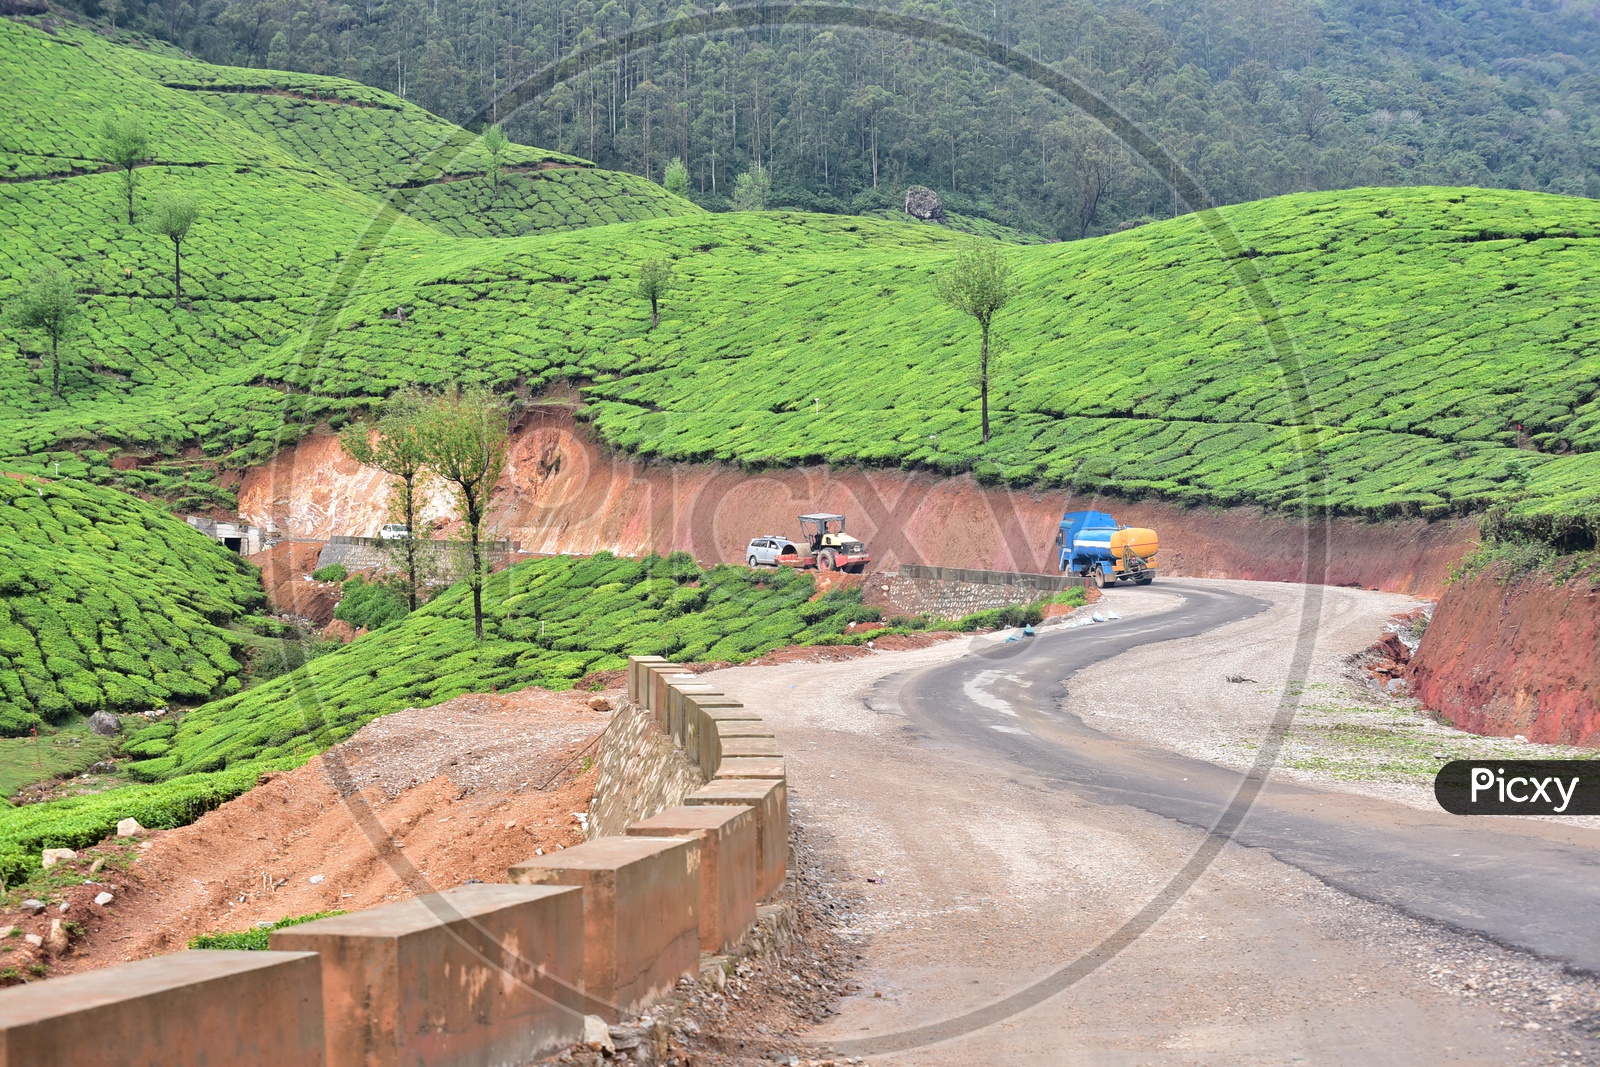 A beautiful View of Ghat Roads and Tea Plantation in Munnar